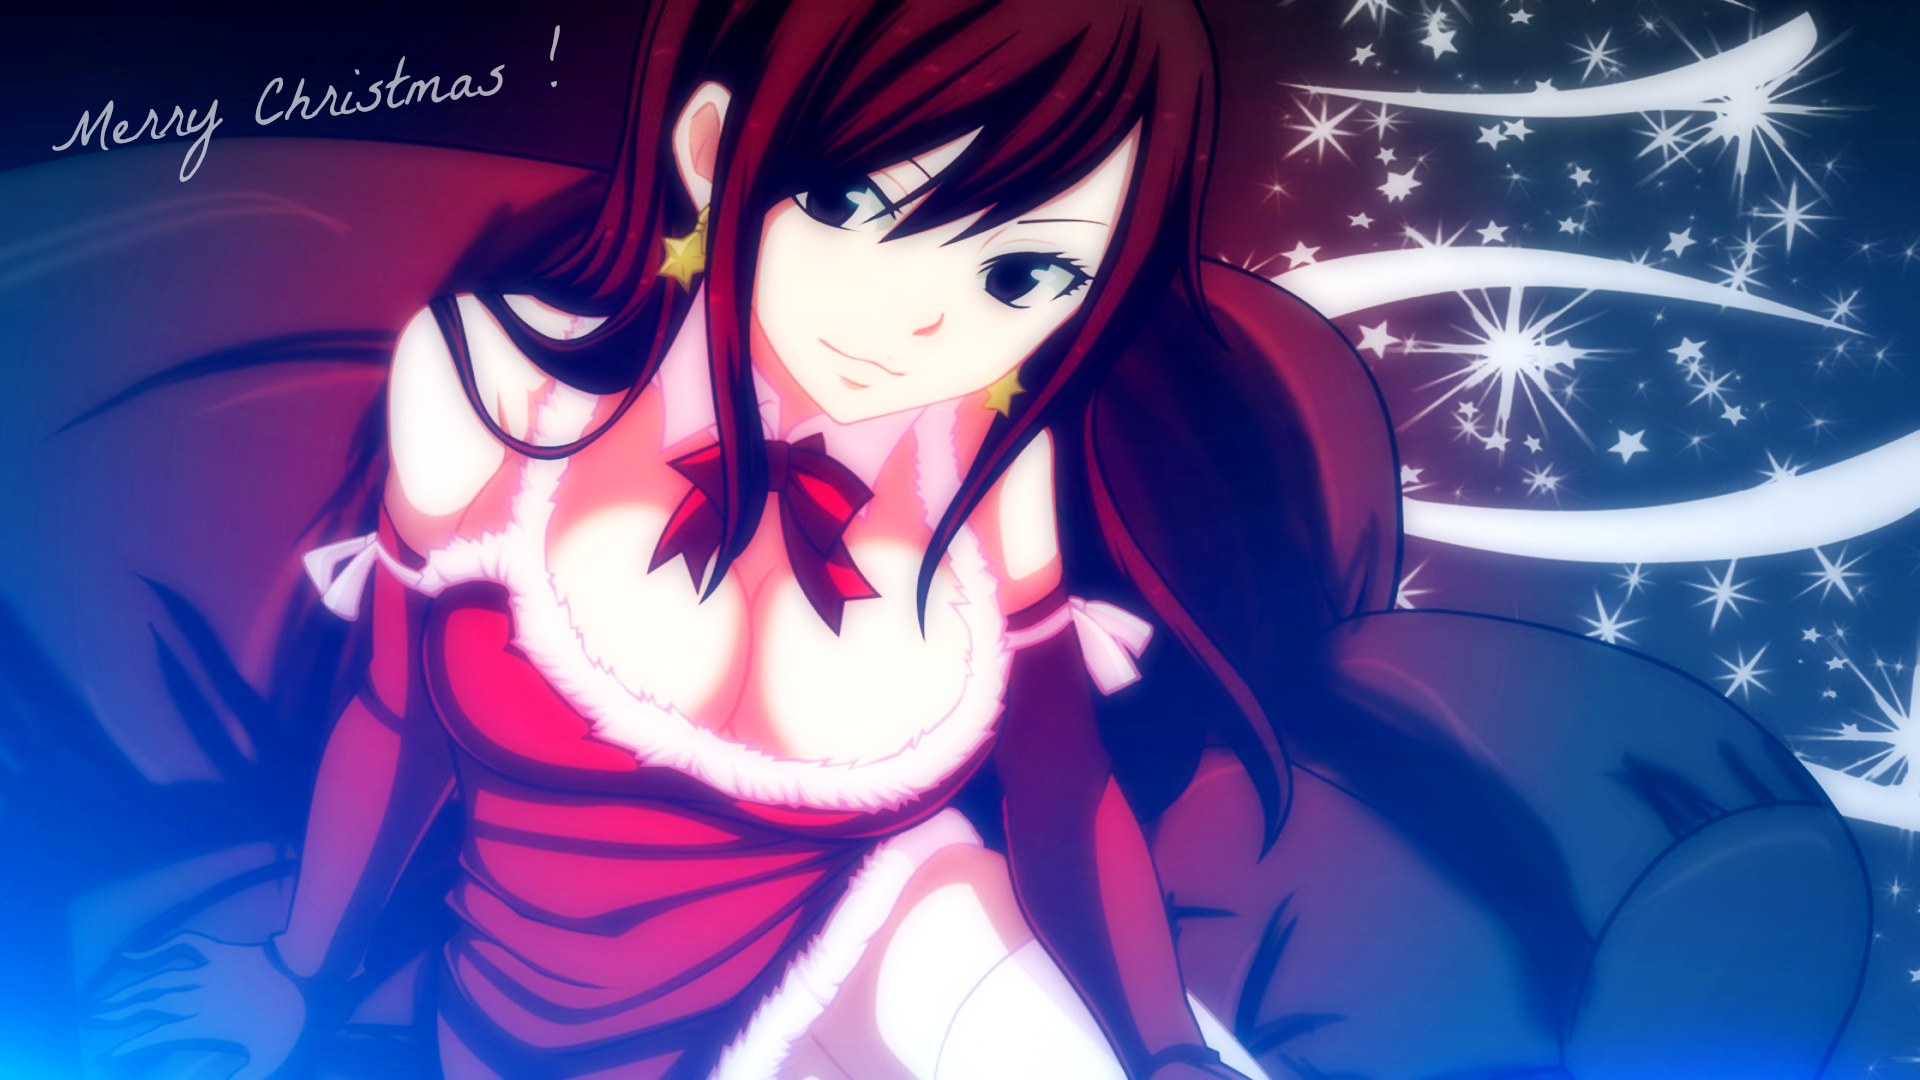 Erza Wish You A Merry Christmas HD Wallpaper Background Image